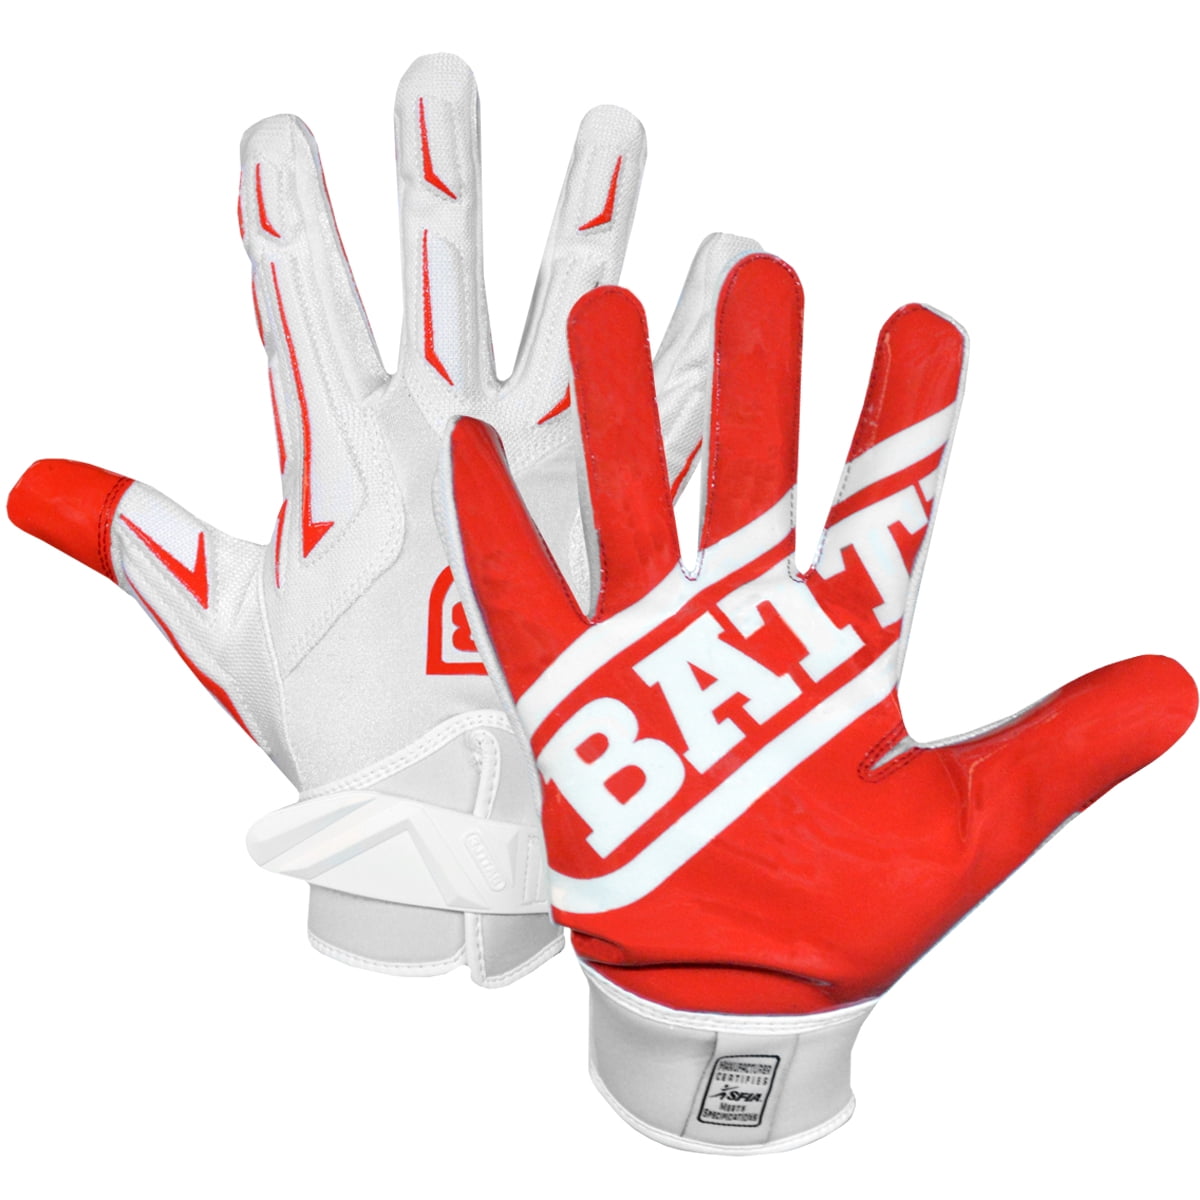 PAIR Battle Sports Ultra-Stick Hybrid Receiver Football Gloves Adult Youth 